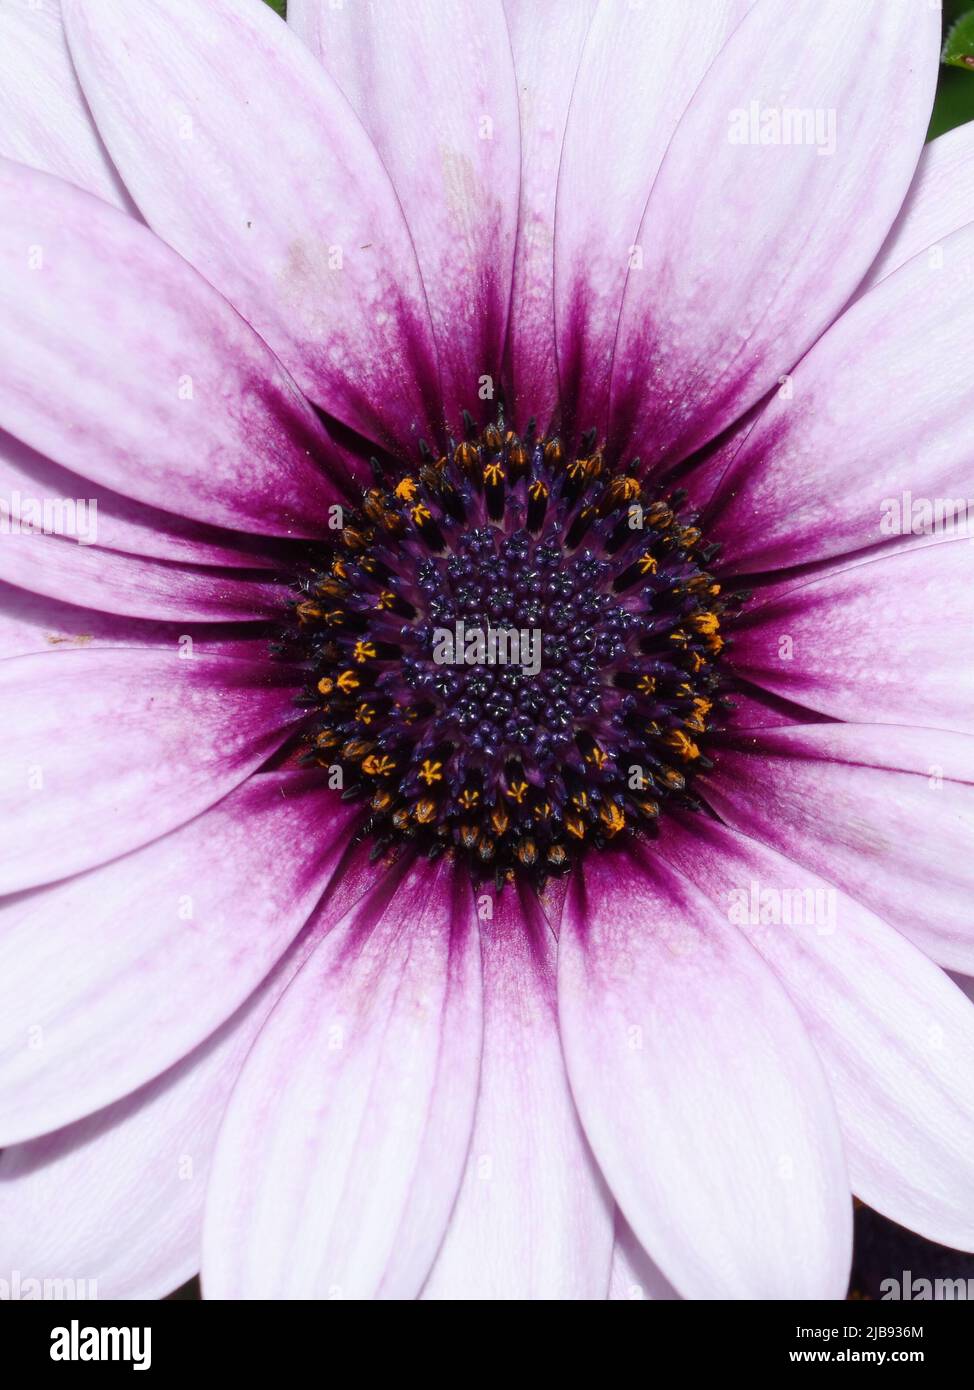 Closeup on a pink spanish marguerite daisy flower Stock Photo